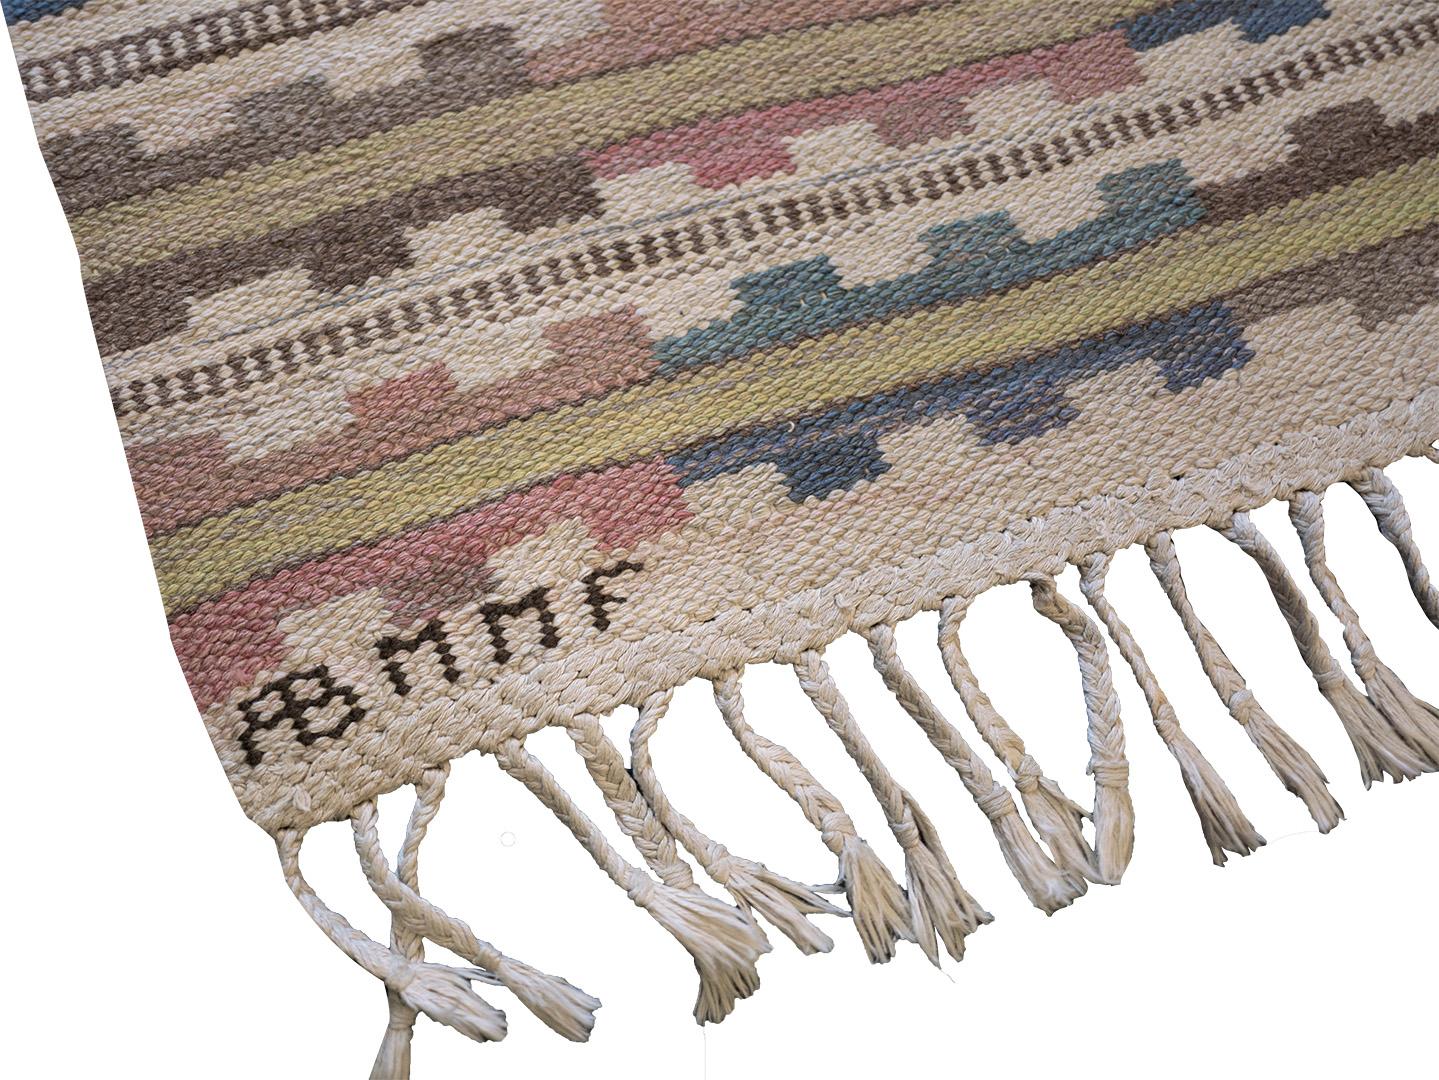 Created by Swedish textile designer Märta Måås-Fjetterström in 1933, this traditional hand-woven Swedish flatweave has an ivory striated field with overall polychrome serrated panel pattern, in a playful counterposed polychrome geometric border.